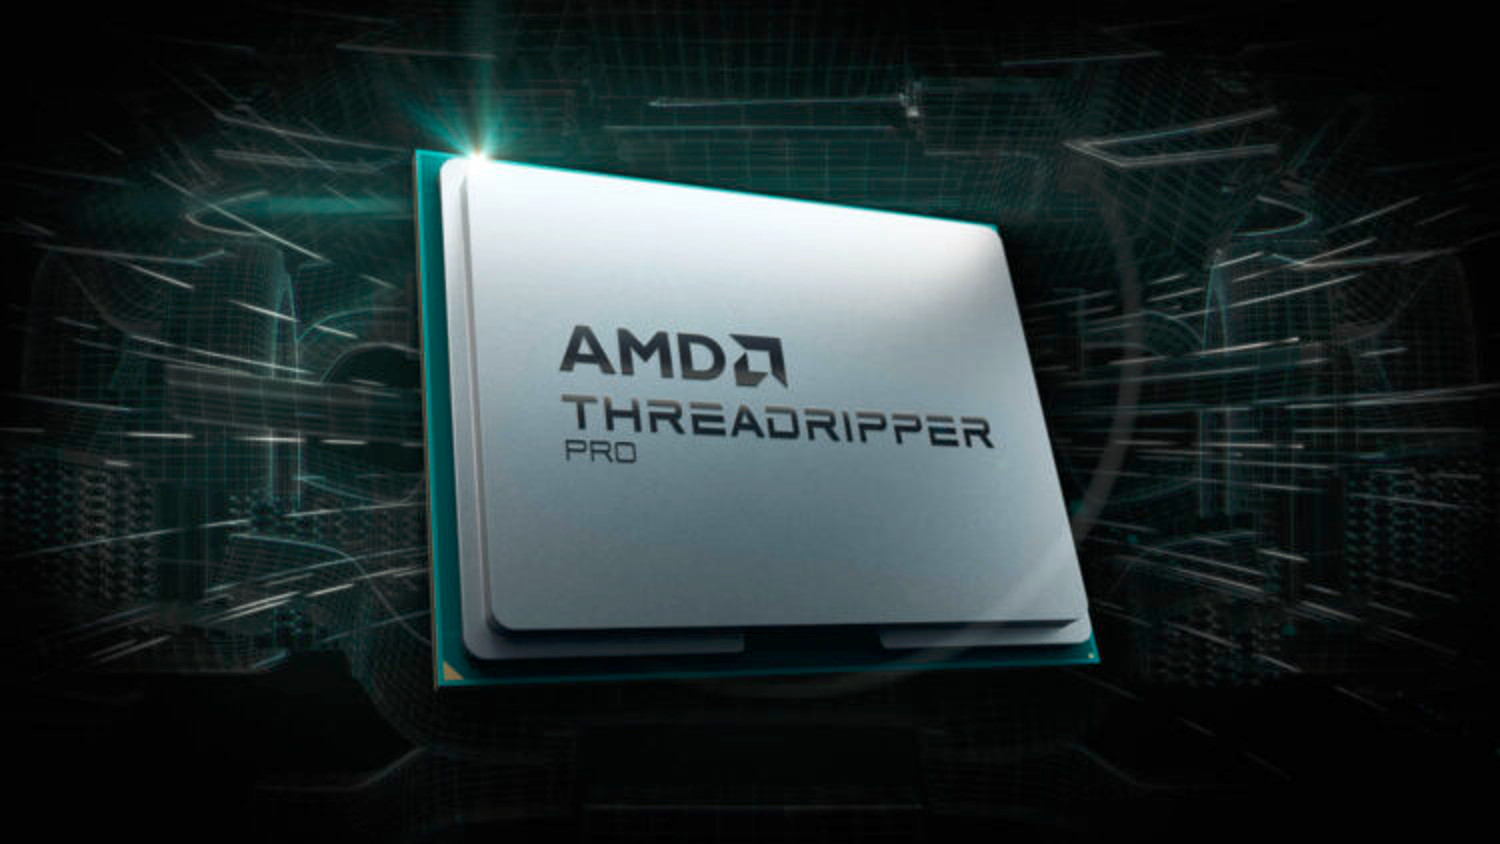 AMD Threadripper Pro launches with Lenovo onboard - DEVELOP3D